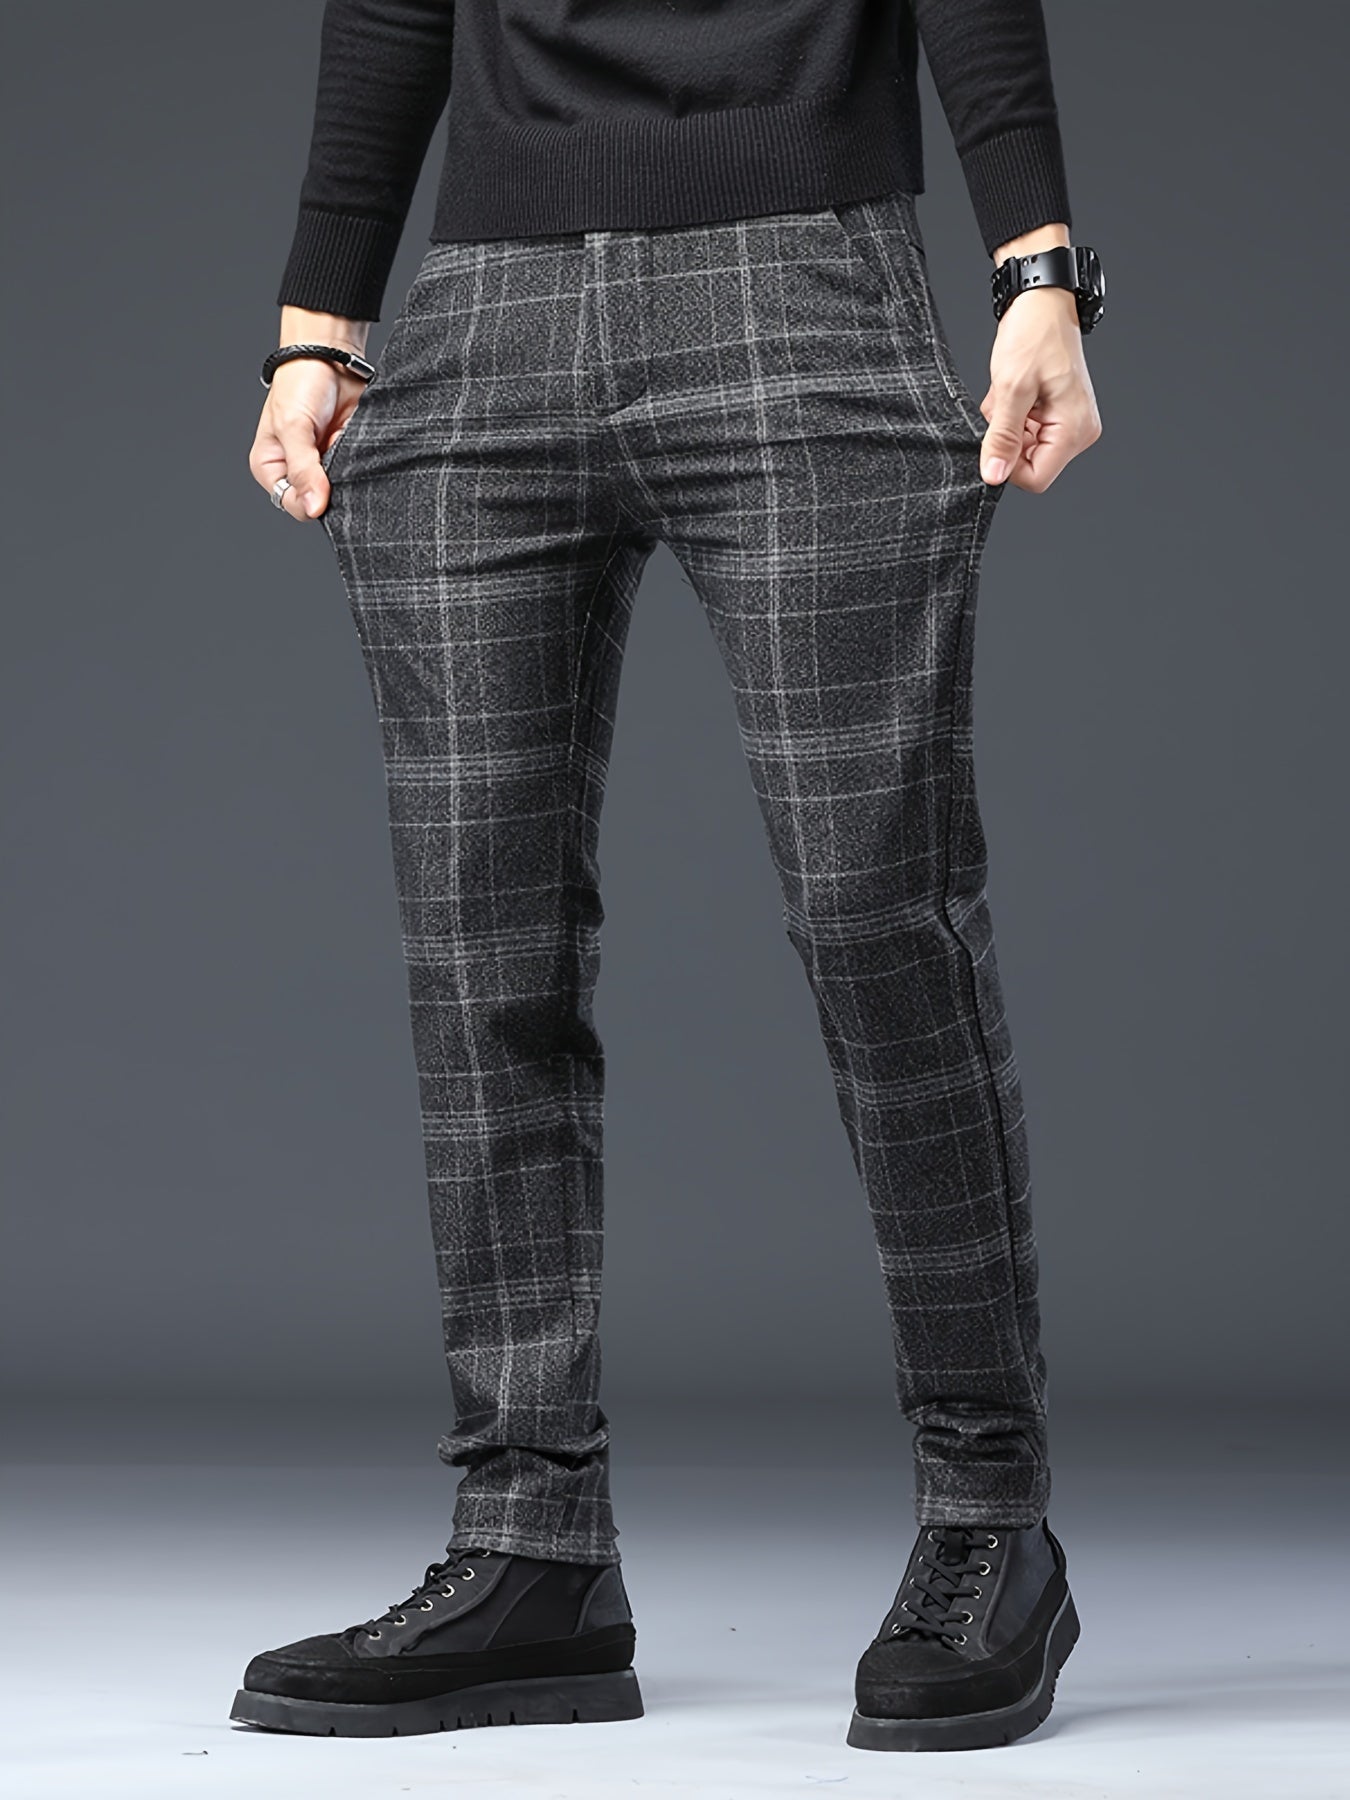 Men's Casual Retro Plaid Slim Fit Trousers For Fall Winter Leisure Activities